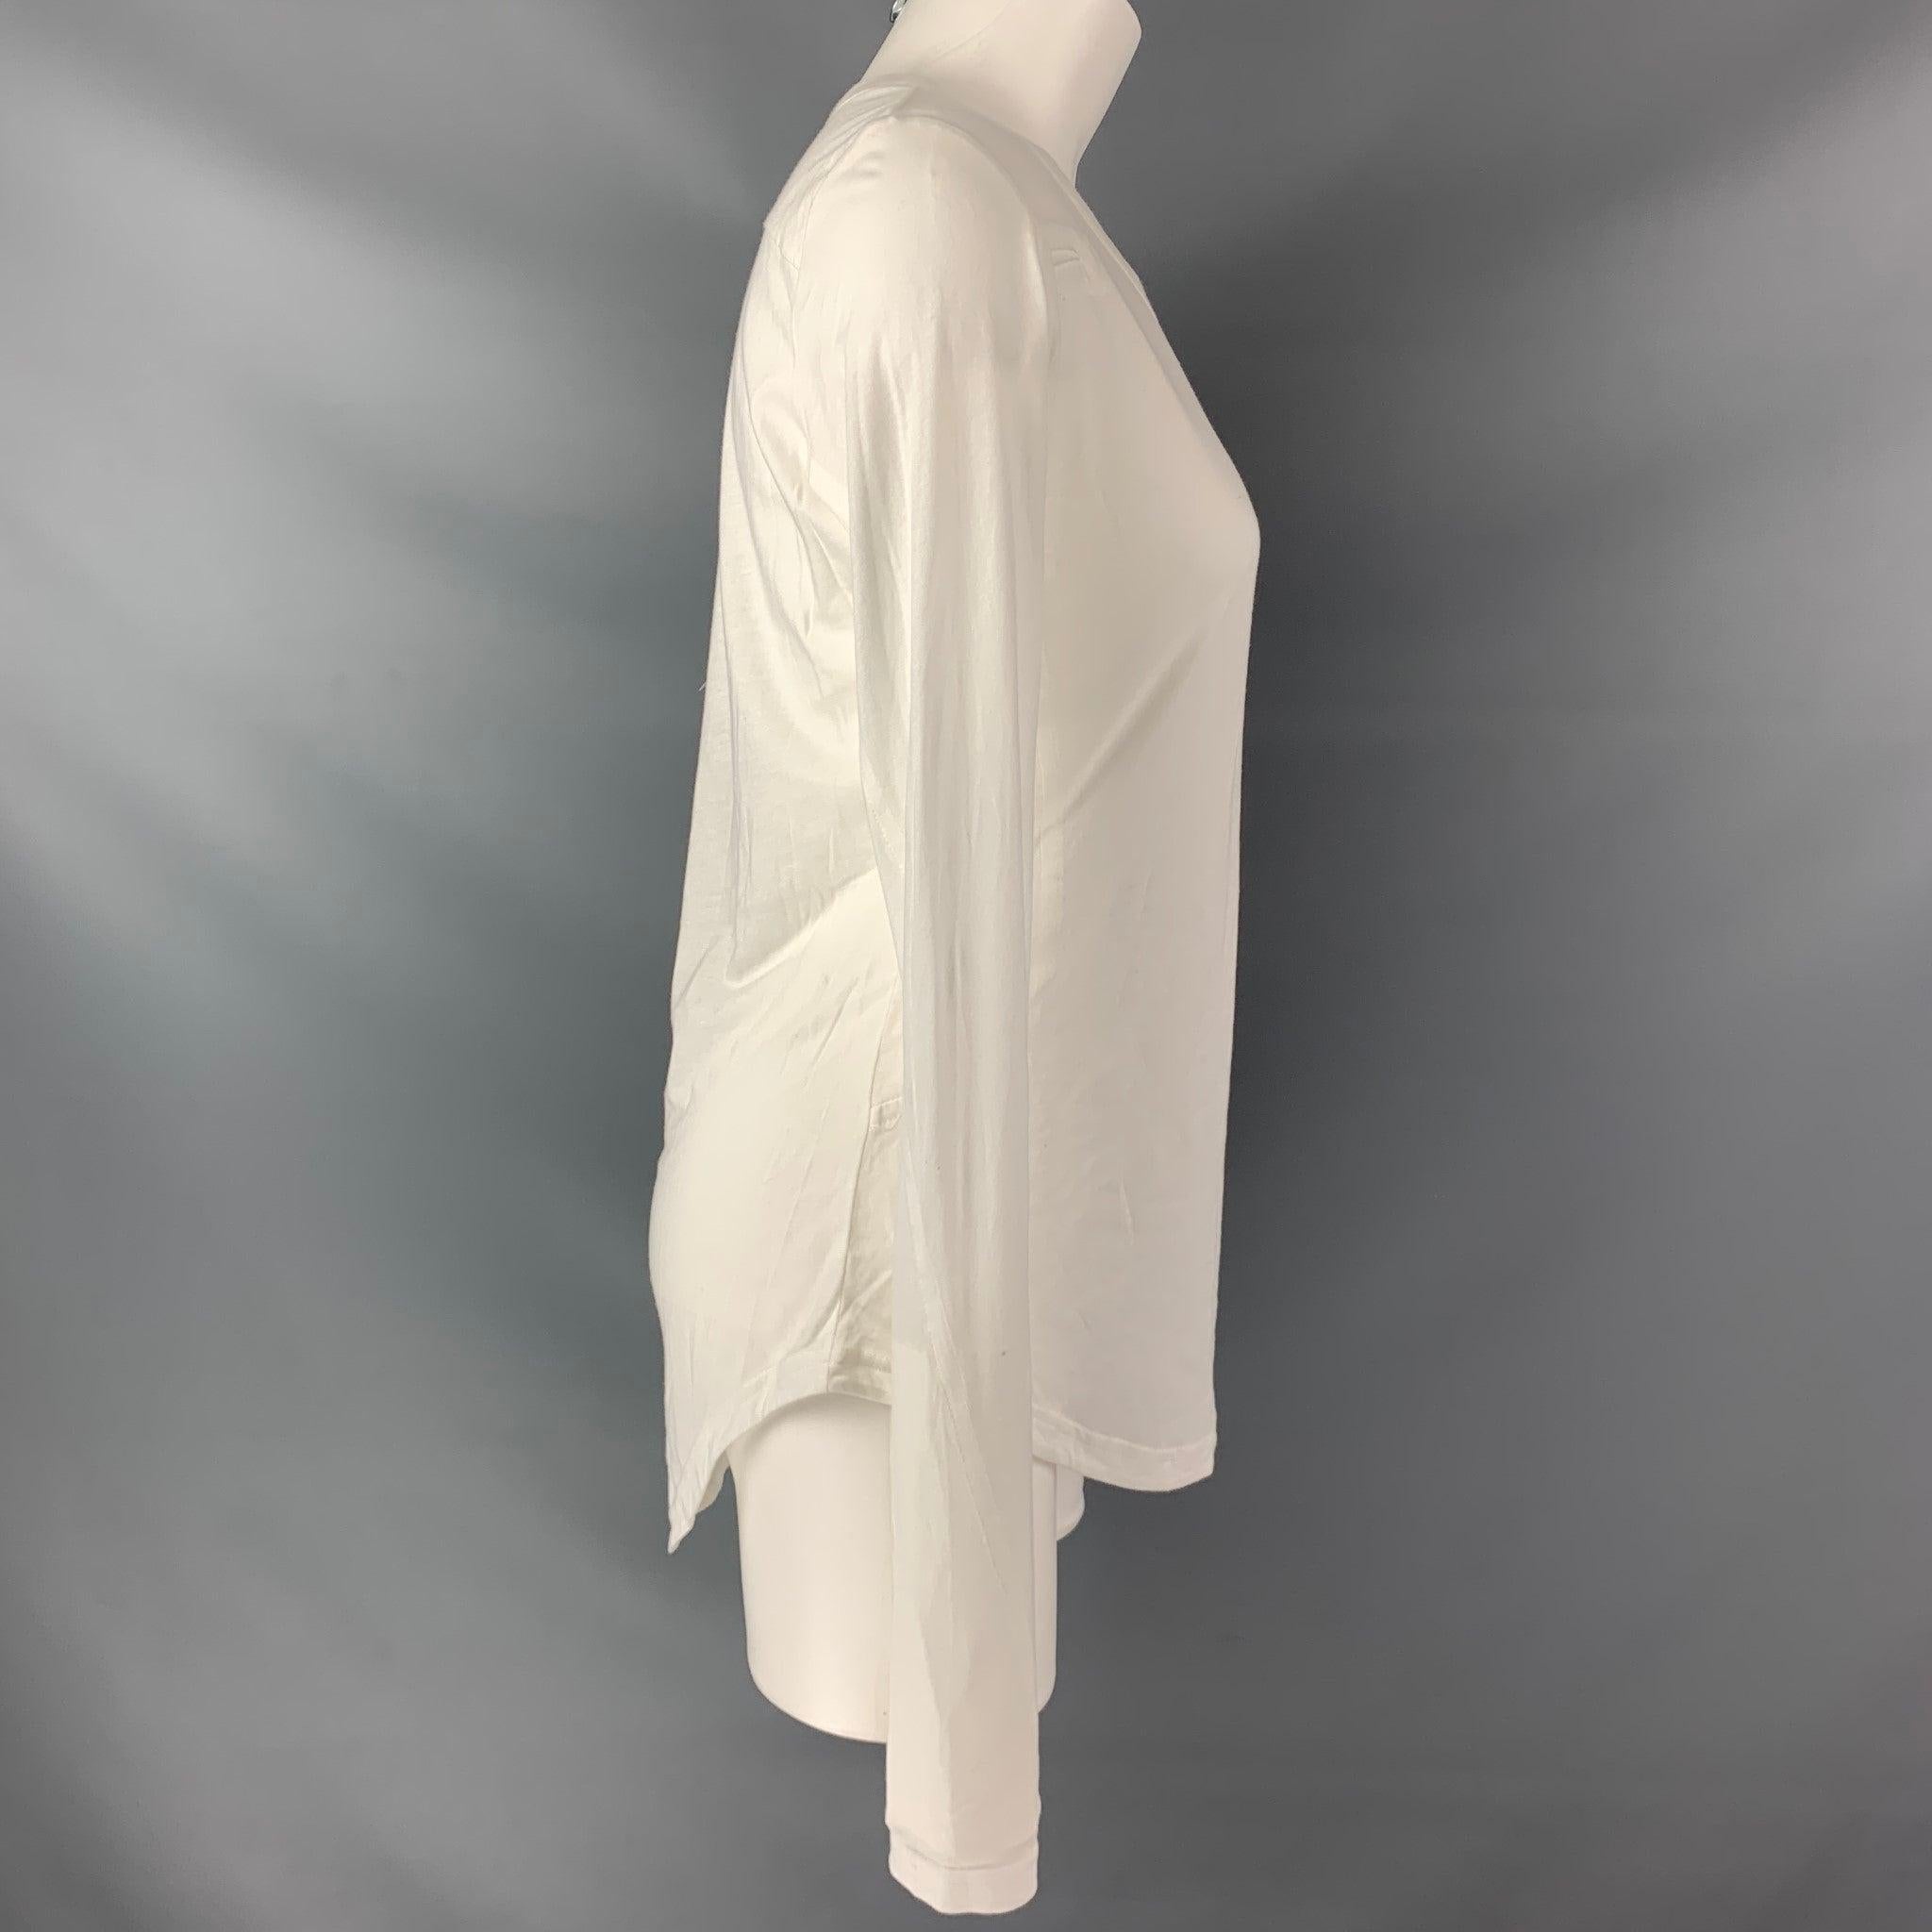 ANN DEMEULEMEESTER long sleeve t-shirt comes in a white cotton solid fabric features a scoop neck and asymmetrical hem line.Very Good Pre-Owned Condition. 
 

 Marked:  36 
 

 Measurements: 
  
 Shoulder: 16 inBust:36 inSleeve:30 in
 Length:
 28